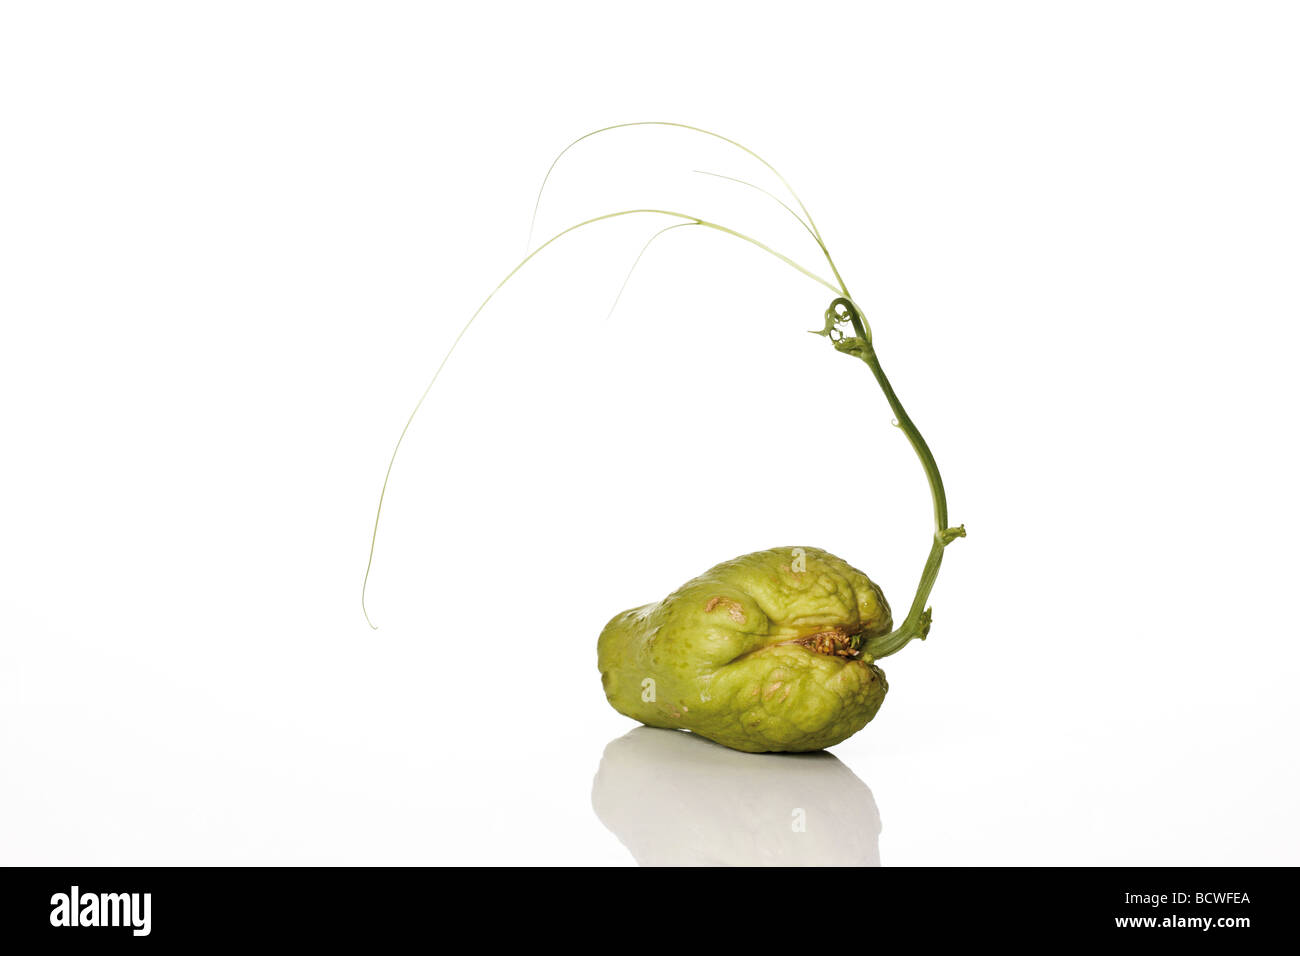 Chayote fruit germinating with climbing tendrils Stock Photo